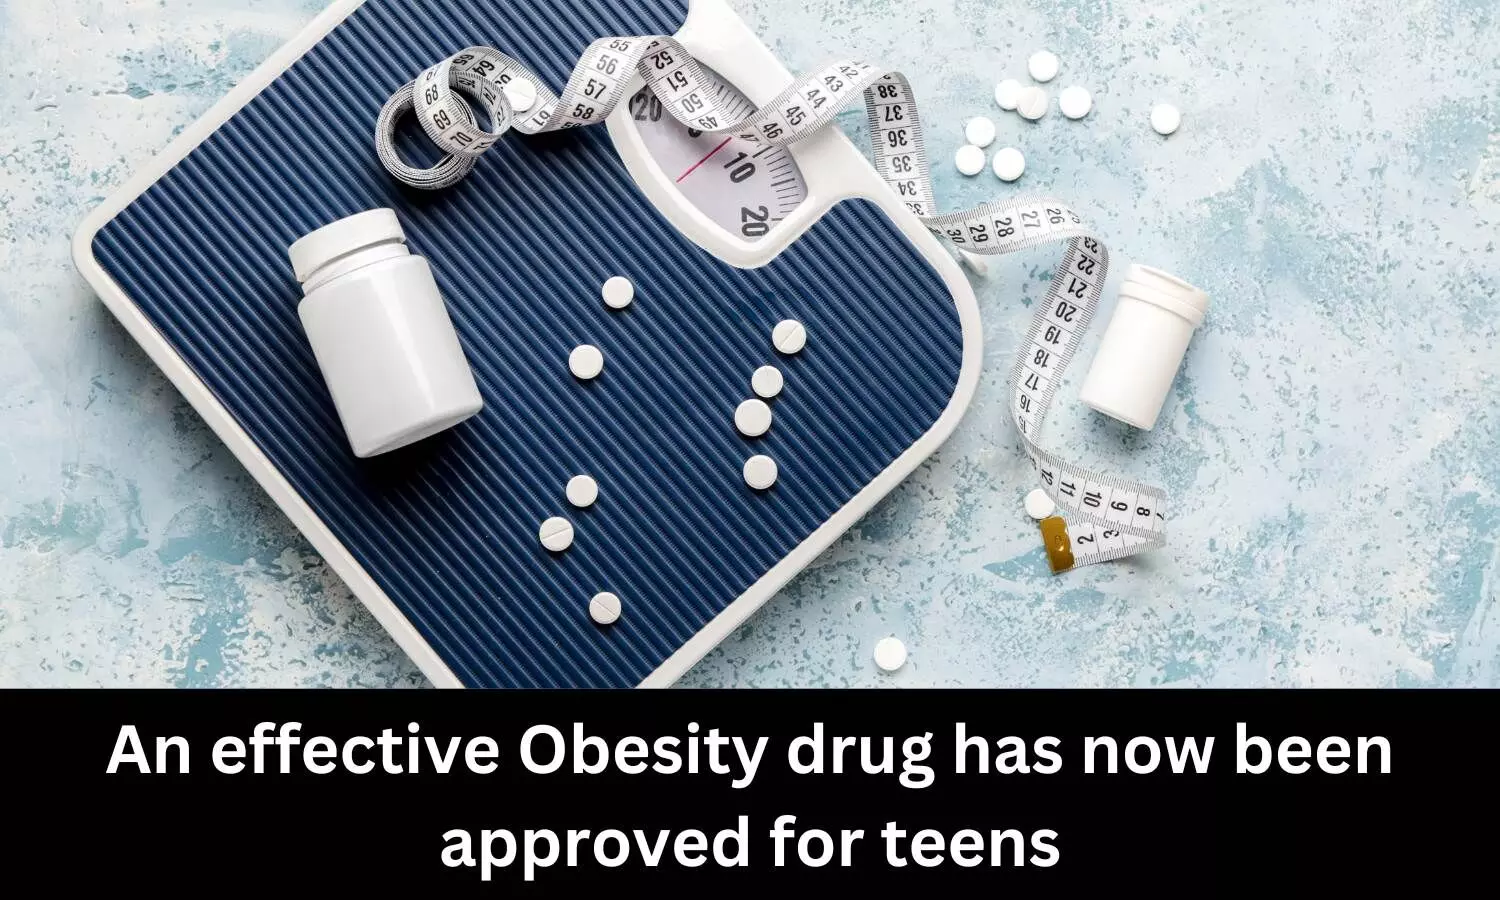 An effective Obesity drug has now been approved for teens